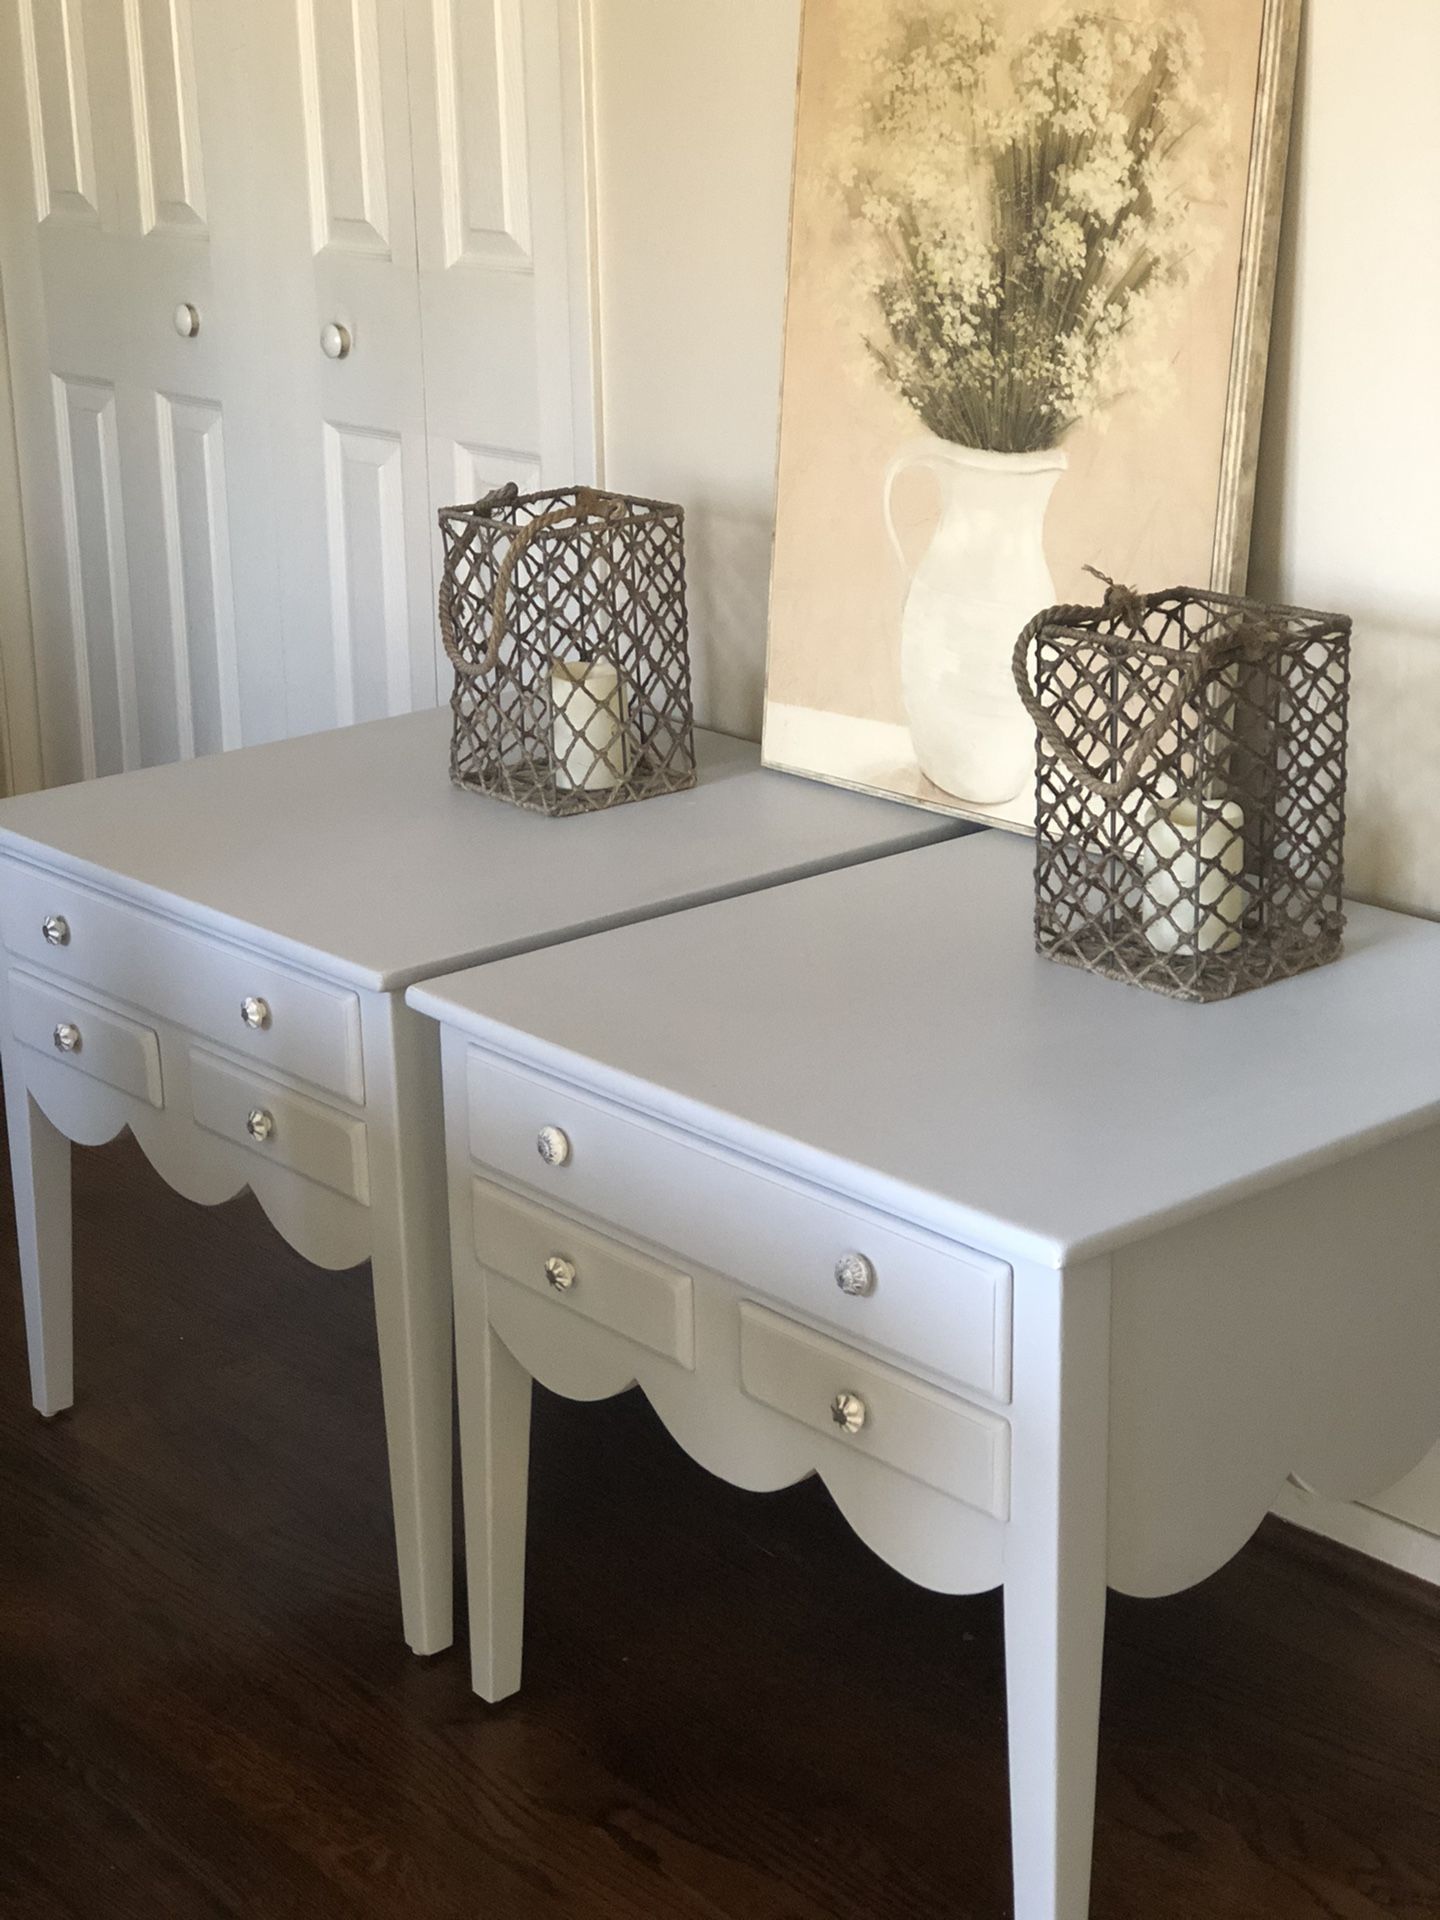 2 night stands/end tables in linen gray